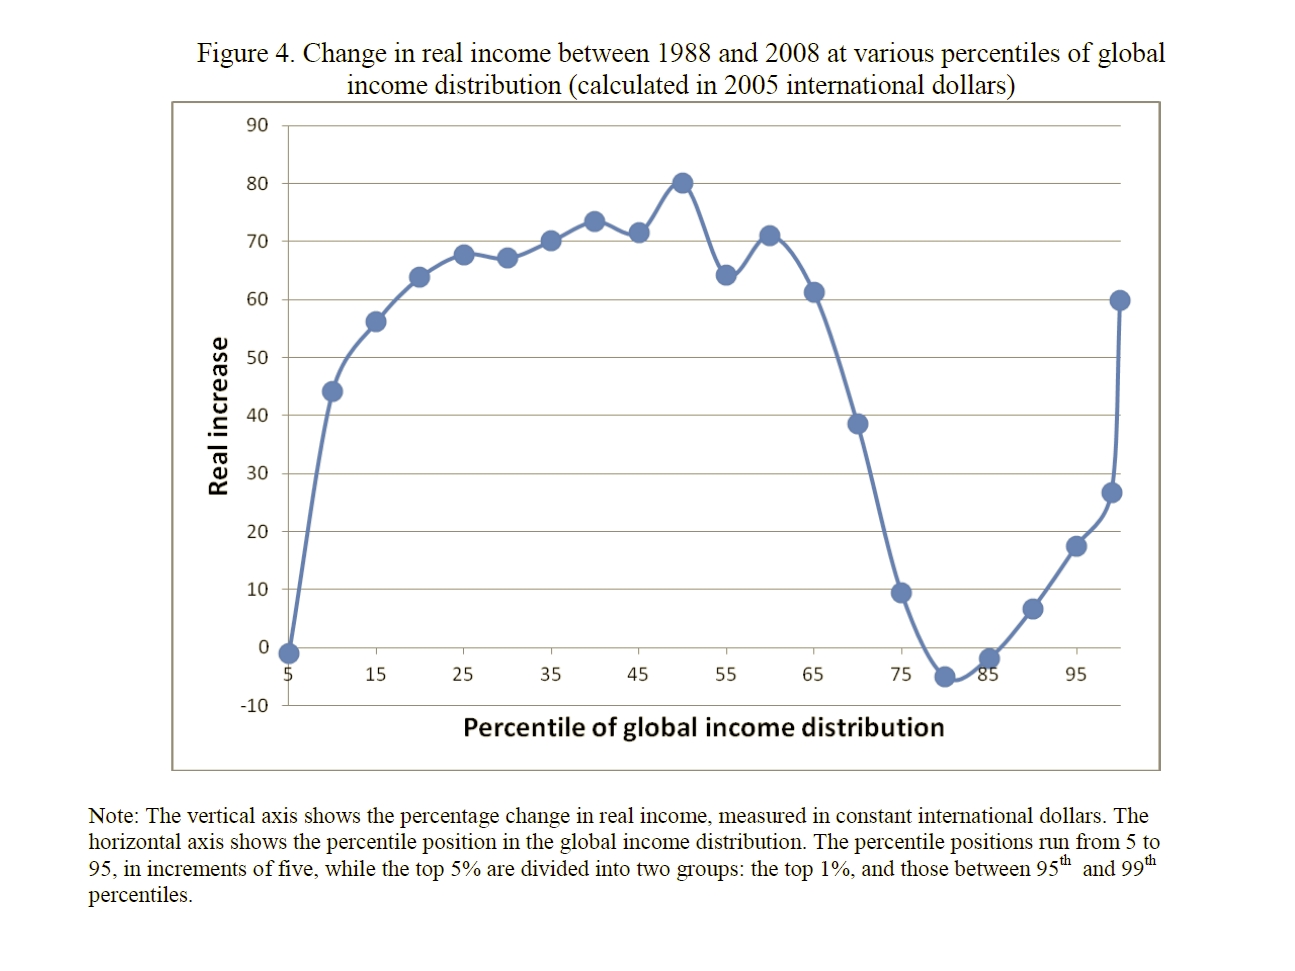 Enlarged view: Figure 4. Change in Real Income Between 1988 and 2008 at Various Percentiles of Global Income Distribution (Calculated in 2005 International Dollars)